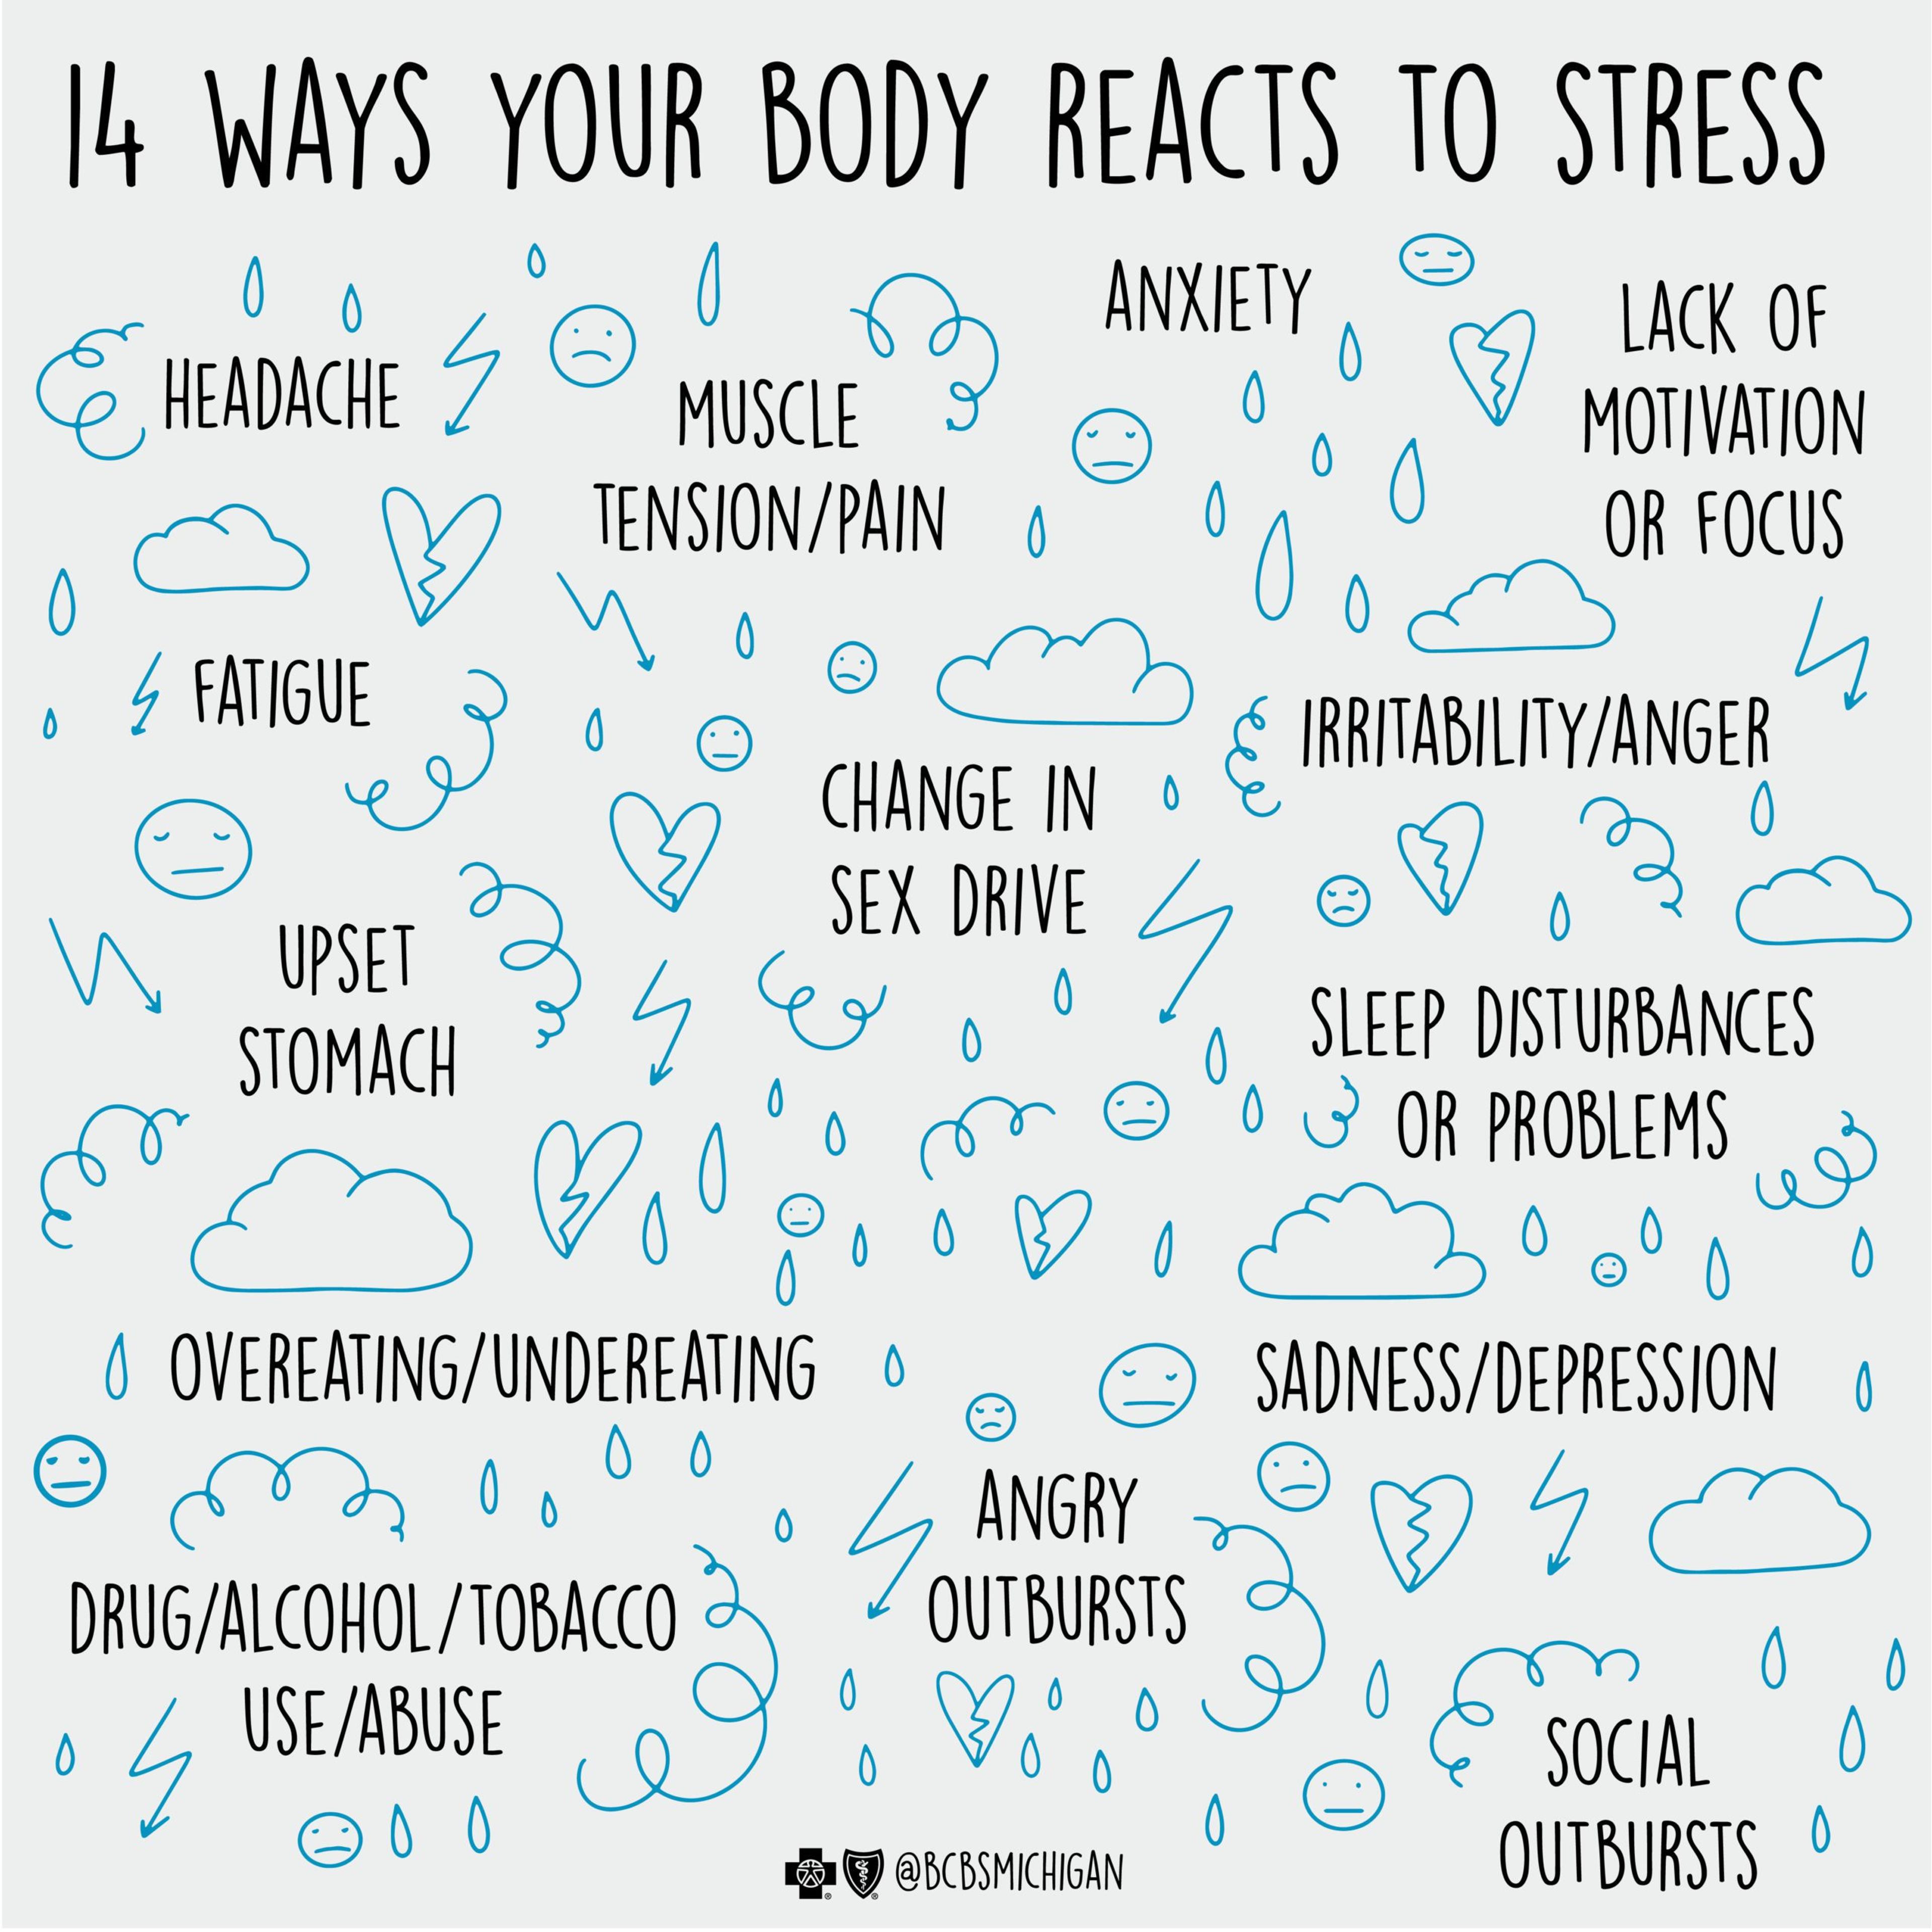 Graphic drawing of ways the body reacts to stress